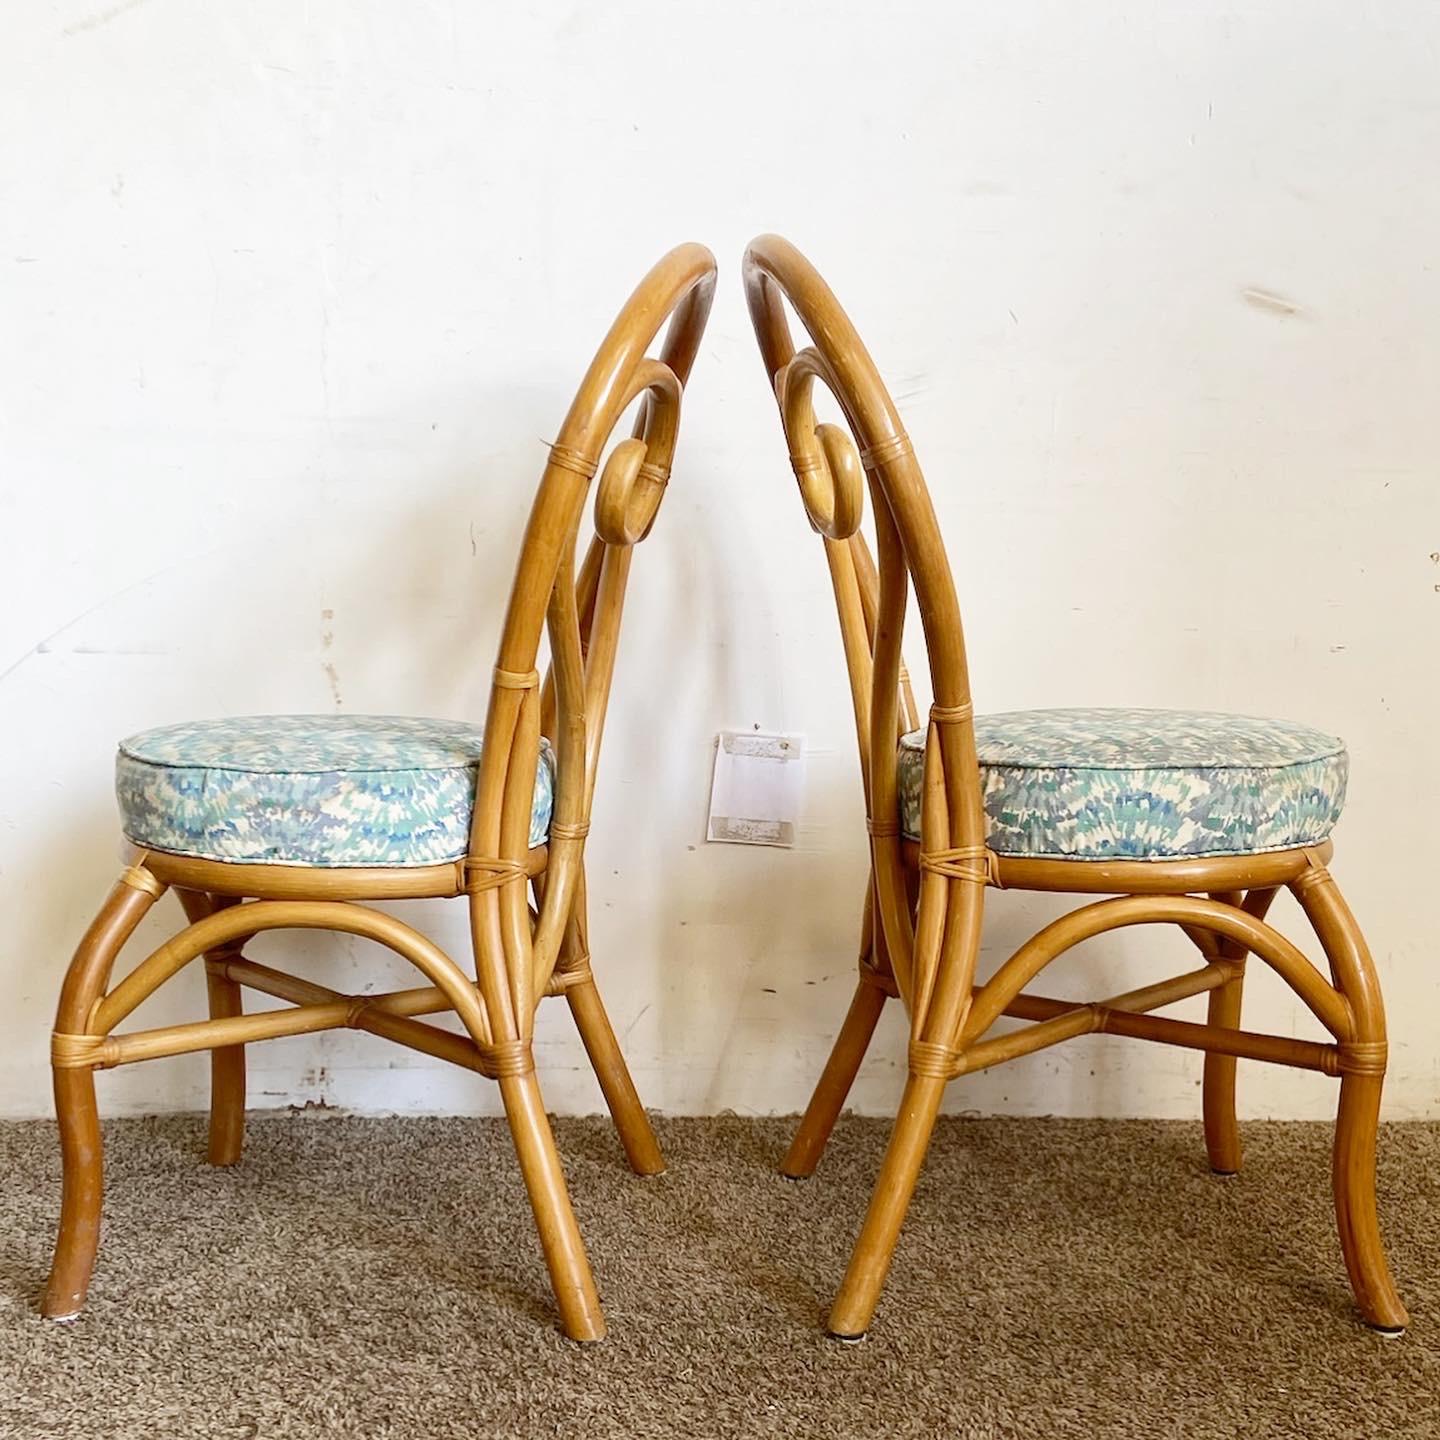 Elevate your dining experience with the Boho Chic Bamboo Rattan Heart Chairs. This set of 4 chairs showcases a unique heart-shaped back, blending natural elegance with a relaxed vibe.
Some wear to the west tan and discoloration to the seat cushions